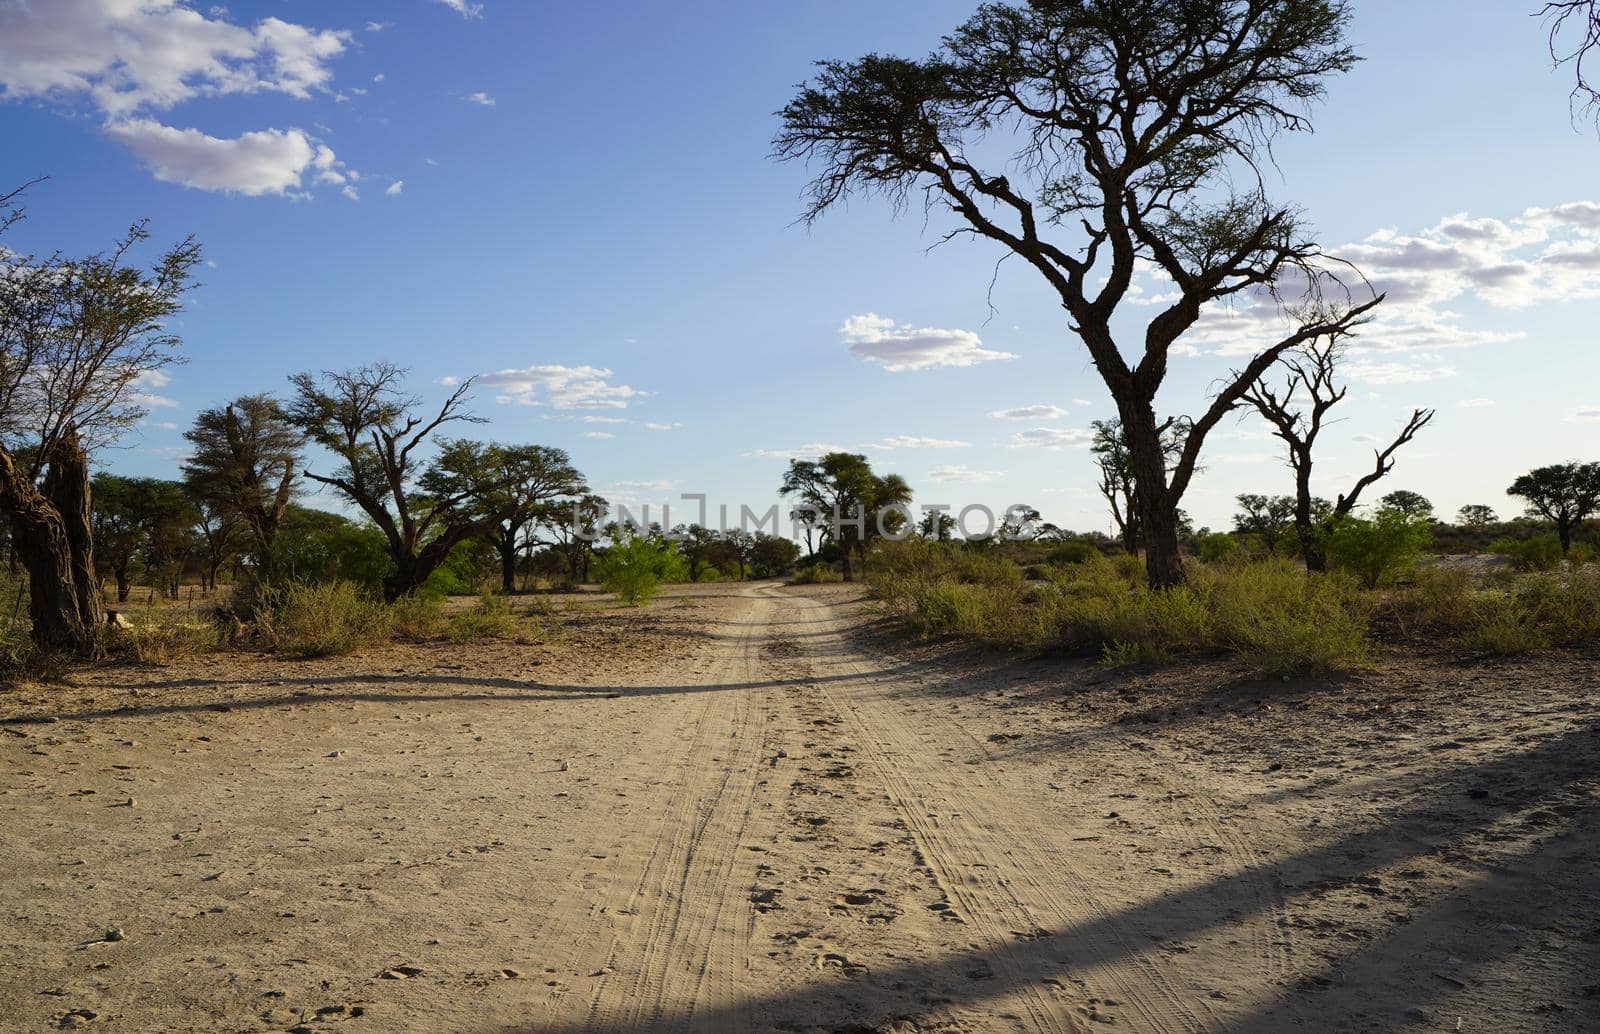 Long dirt road in the open Savannah, Africa by fivepointsix